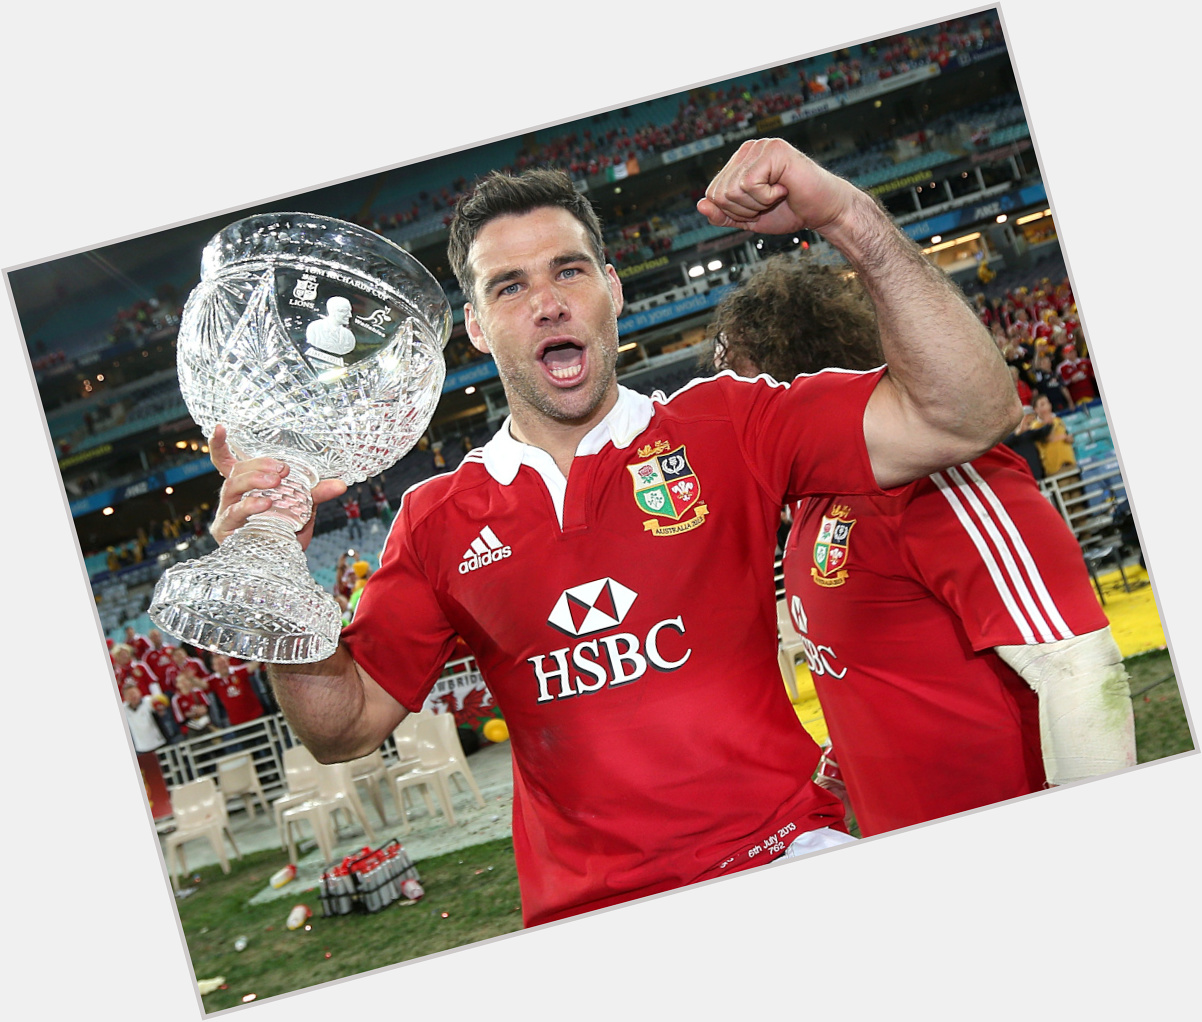  Happy 38th birthday to Wales and Lions legend Mike Phillips! 